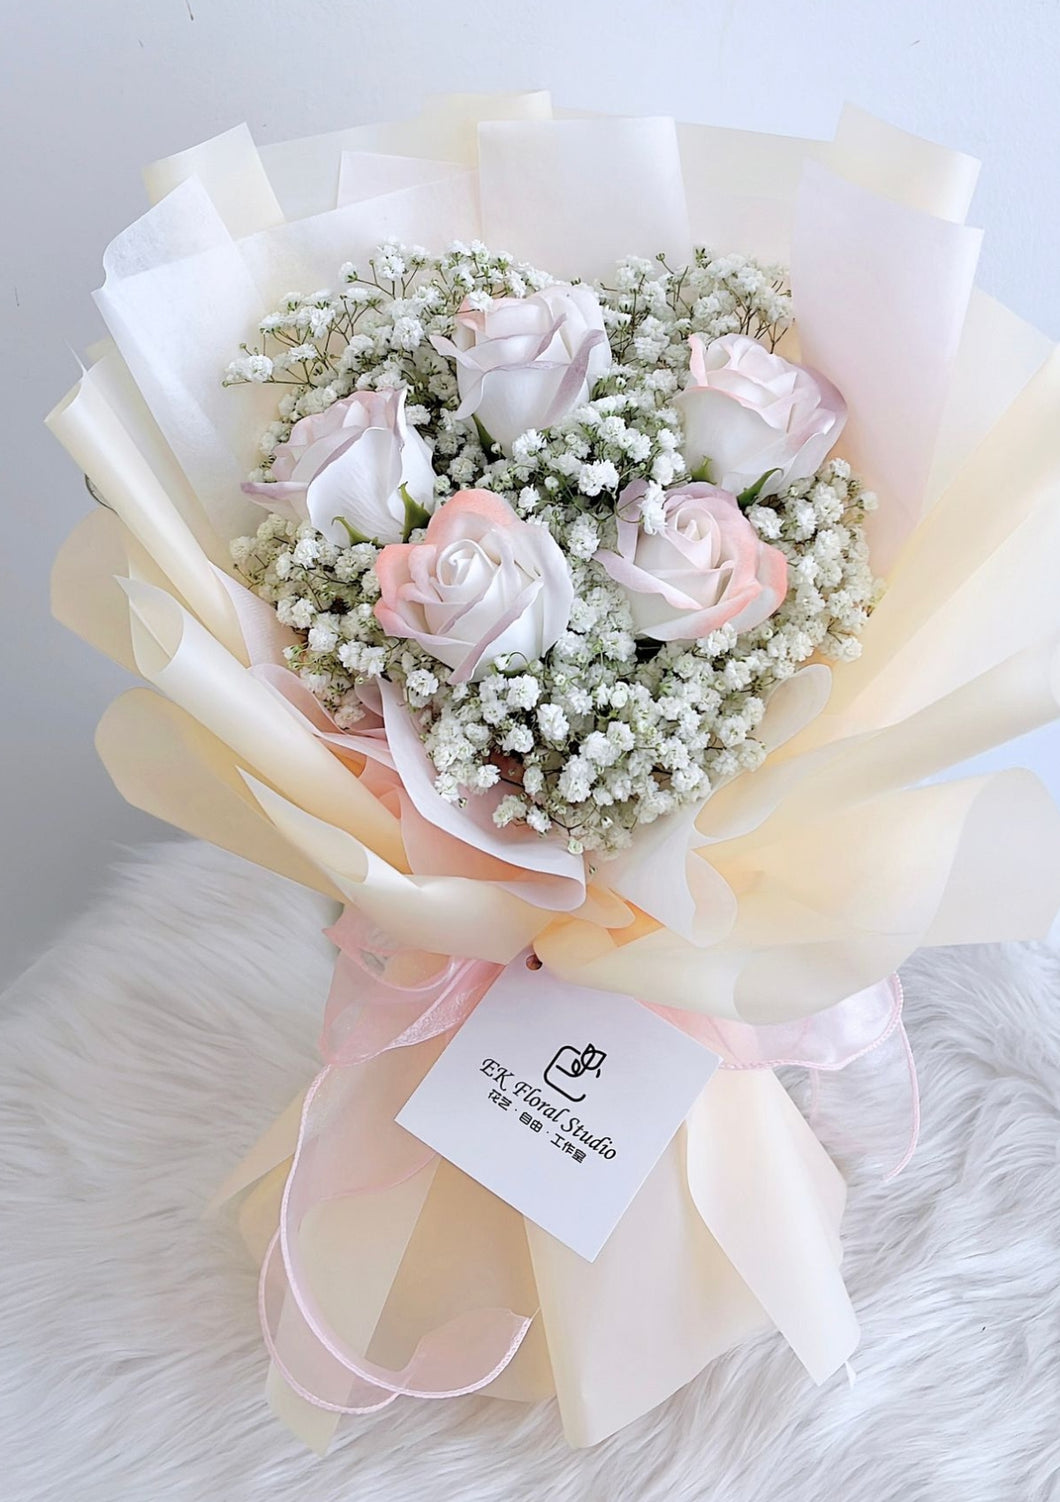 5 Champagne pink Soap Rose with White Baby Breath Bouquet 5朵香槟粉香皂玫瑰白色满天星花束